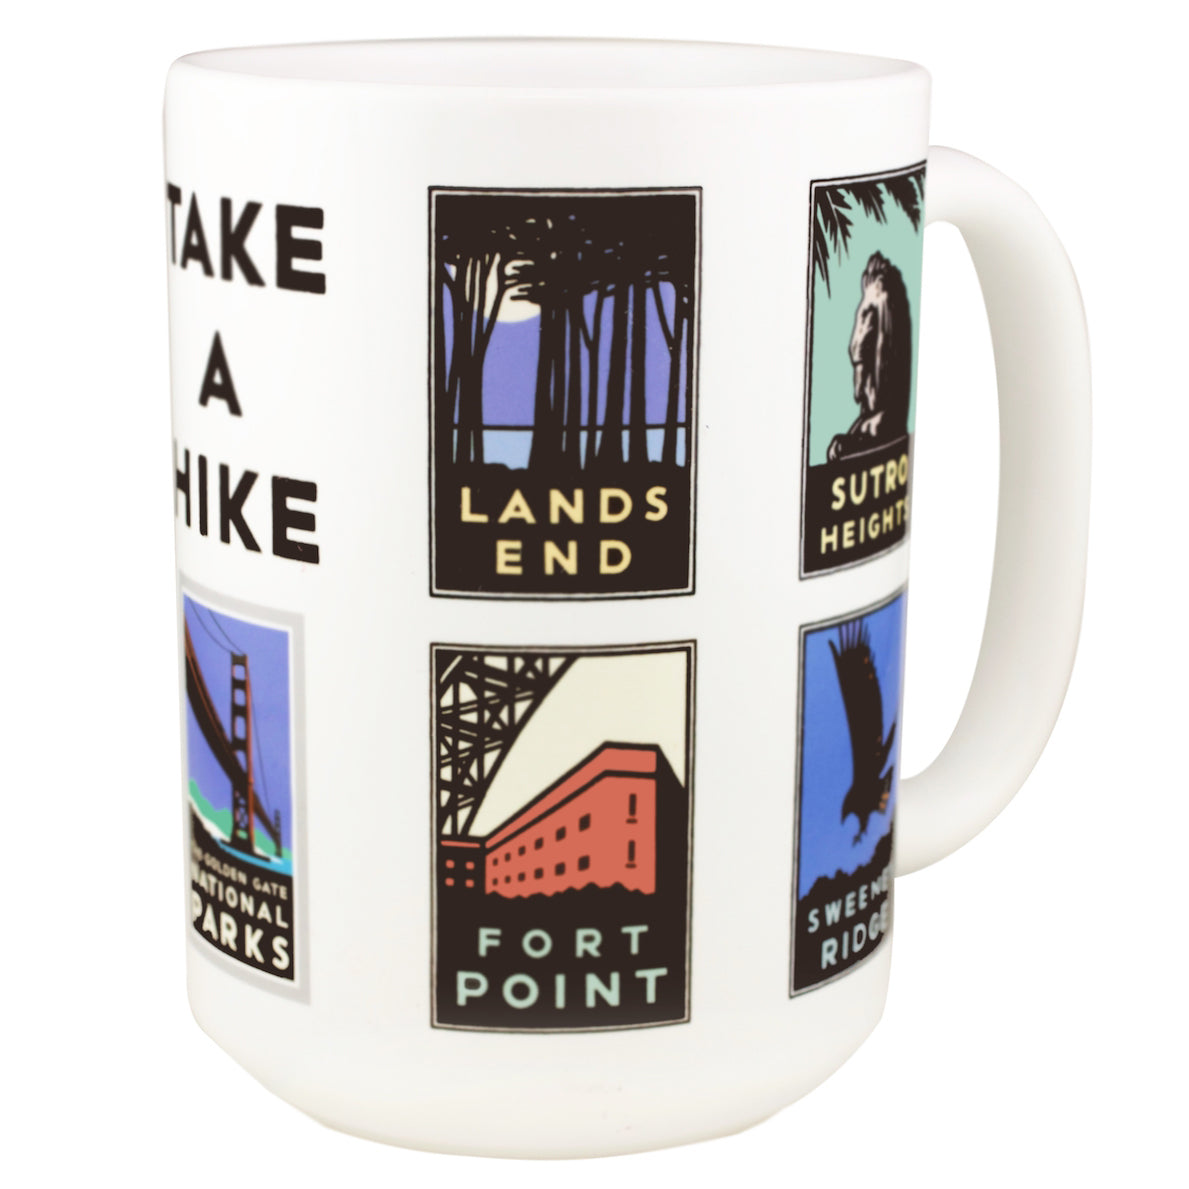 15 oz. white mug with nine colorful Golden Gate National Park icons and "Take a Hike" slogan. Artwork by Michael Schwab.